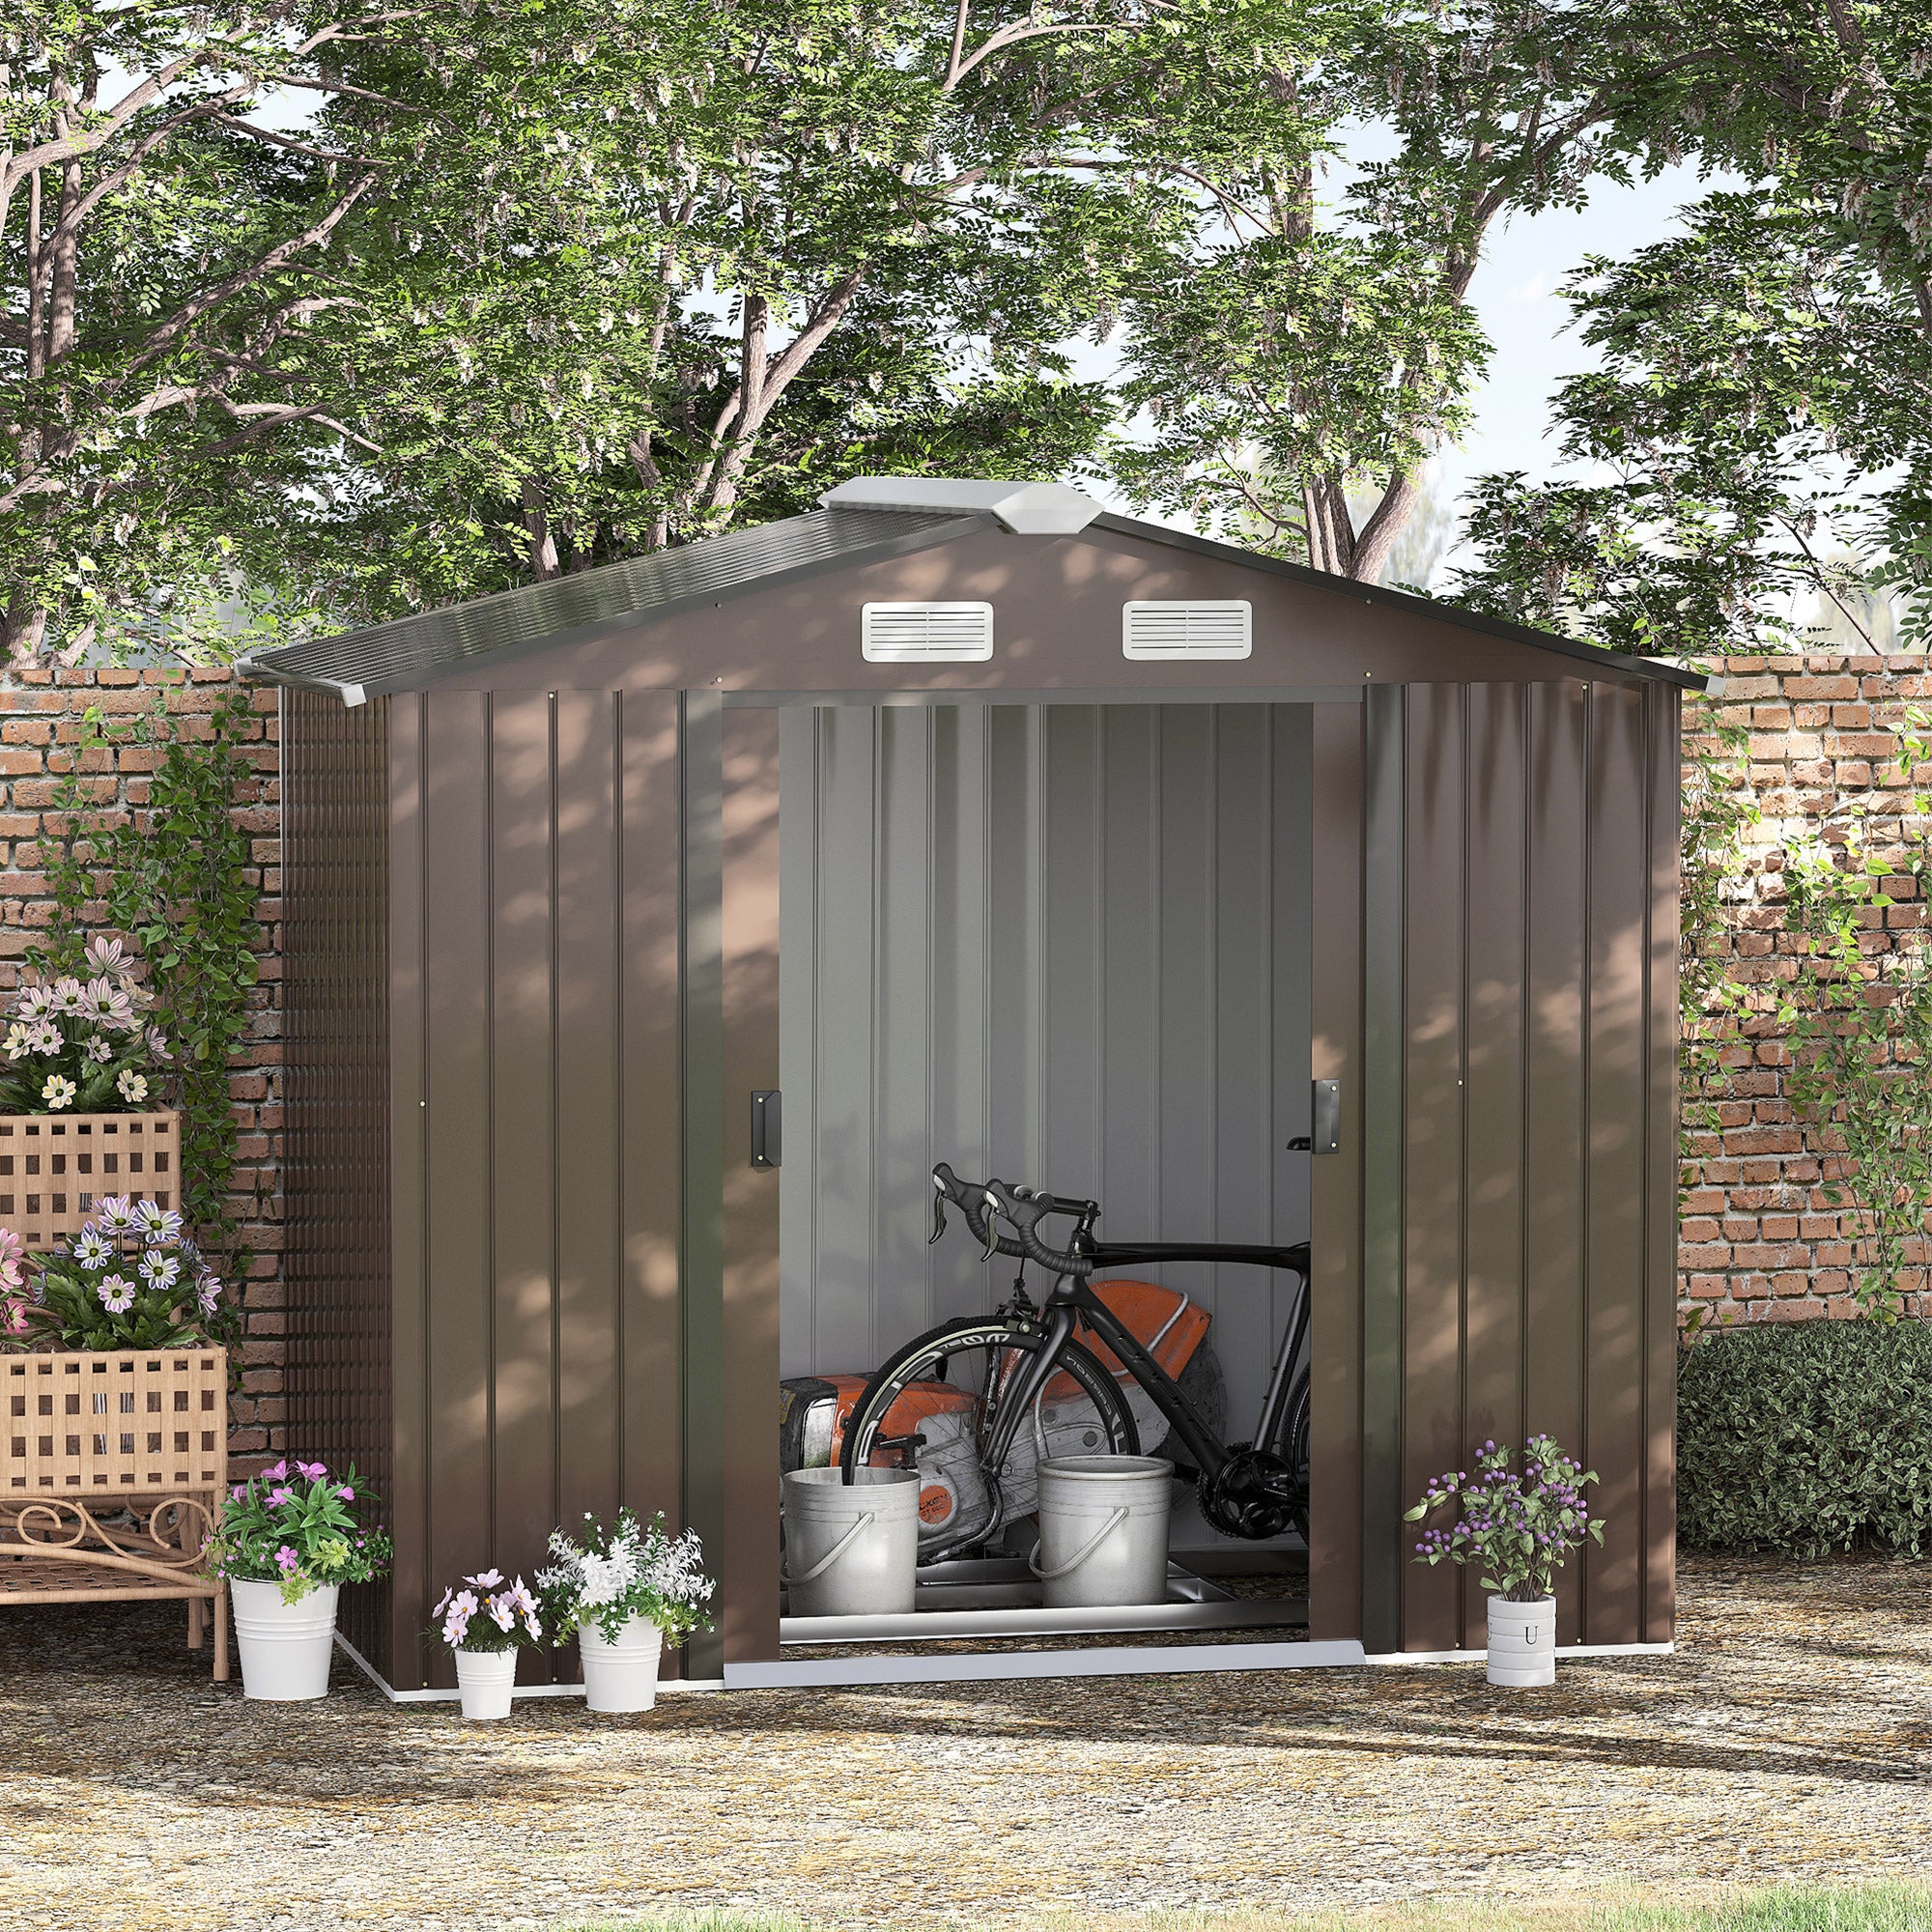 Outsunny 7ft x 4ft Lockable Garden Metal Storage Shed Large Patio Roofed Tool Storage Building Foundation Sheds Box Outdoor Furniture, Brown